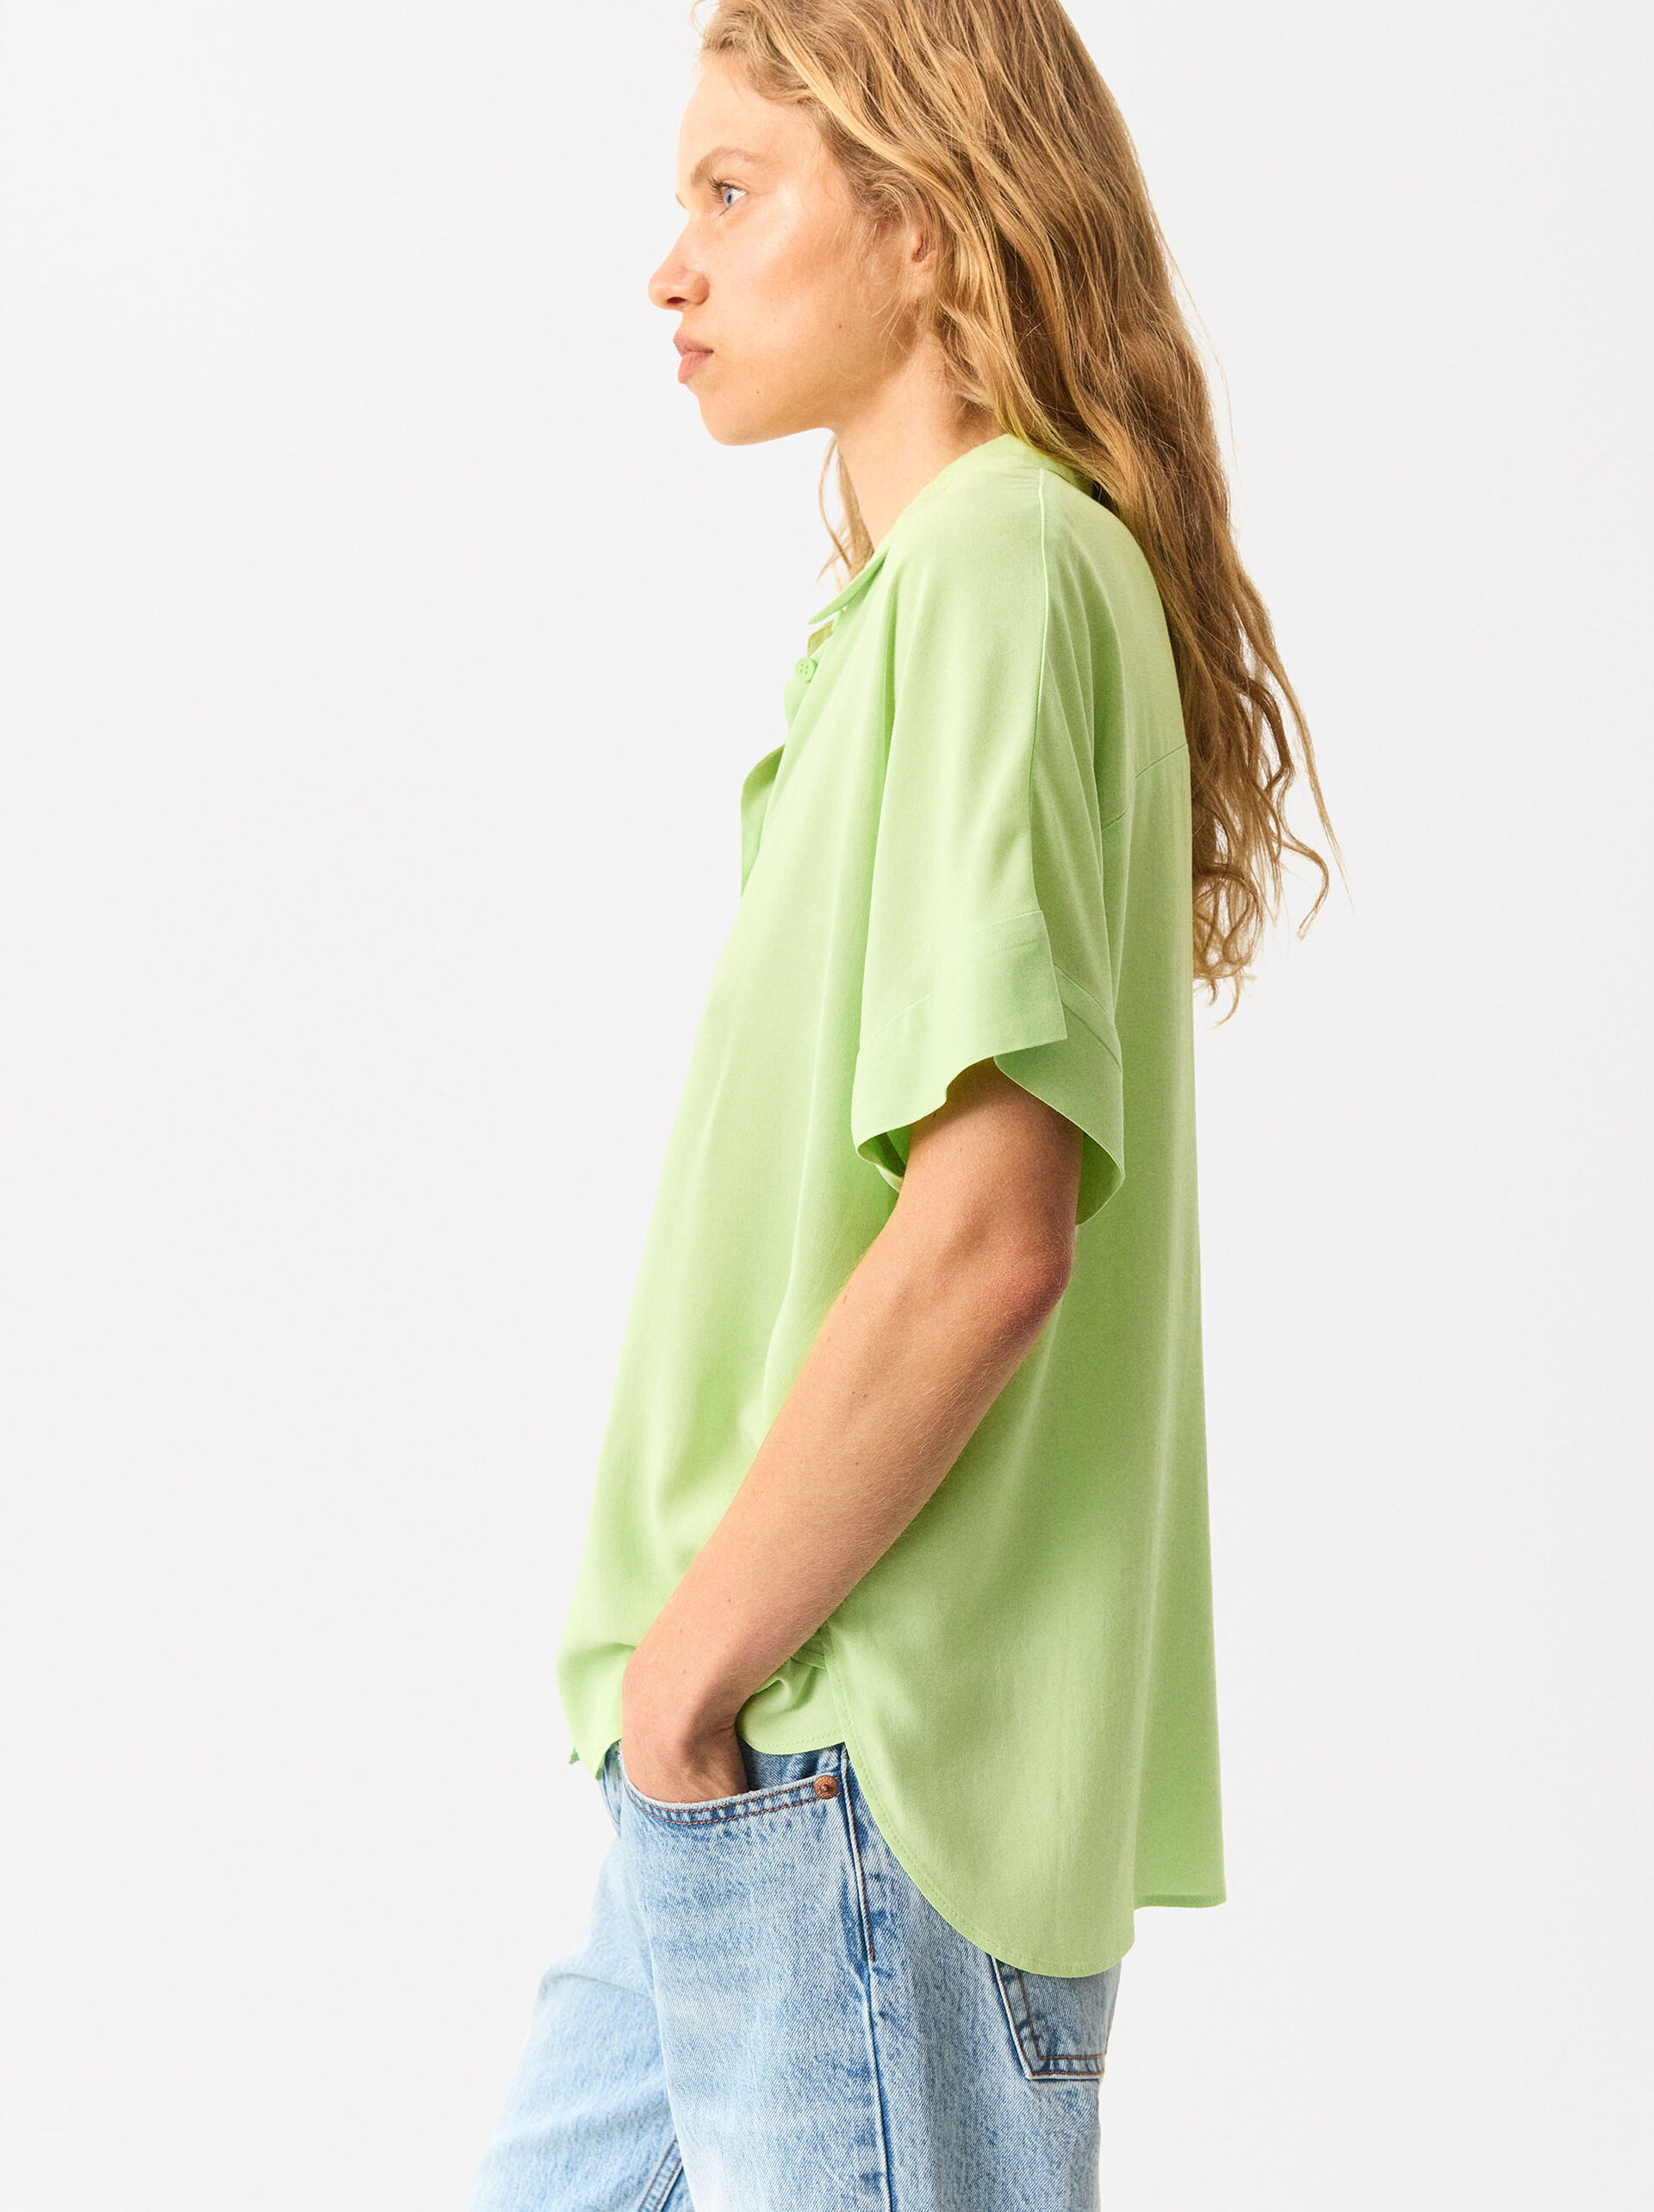 Short-Sleeved Shirt With Buttons image number 2.0